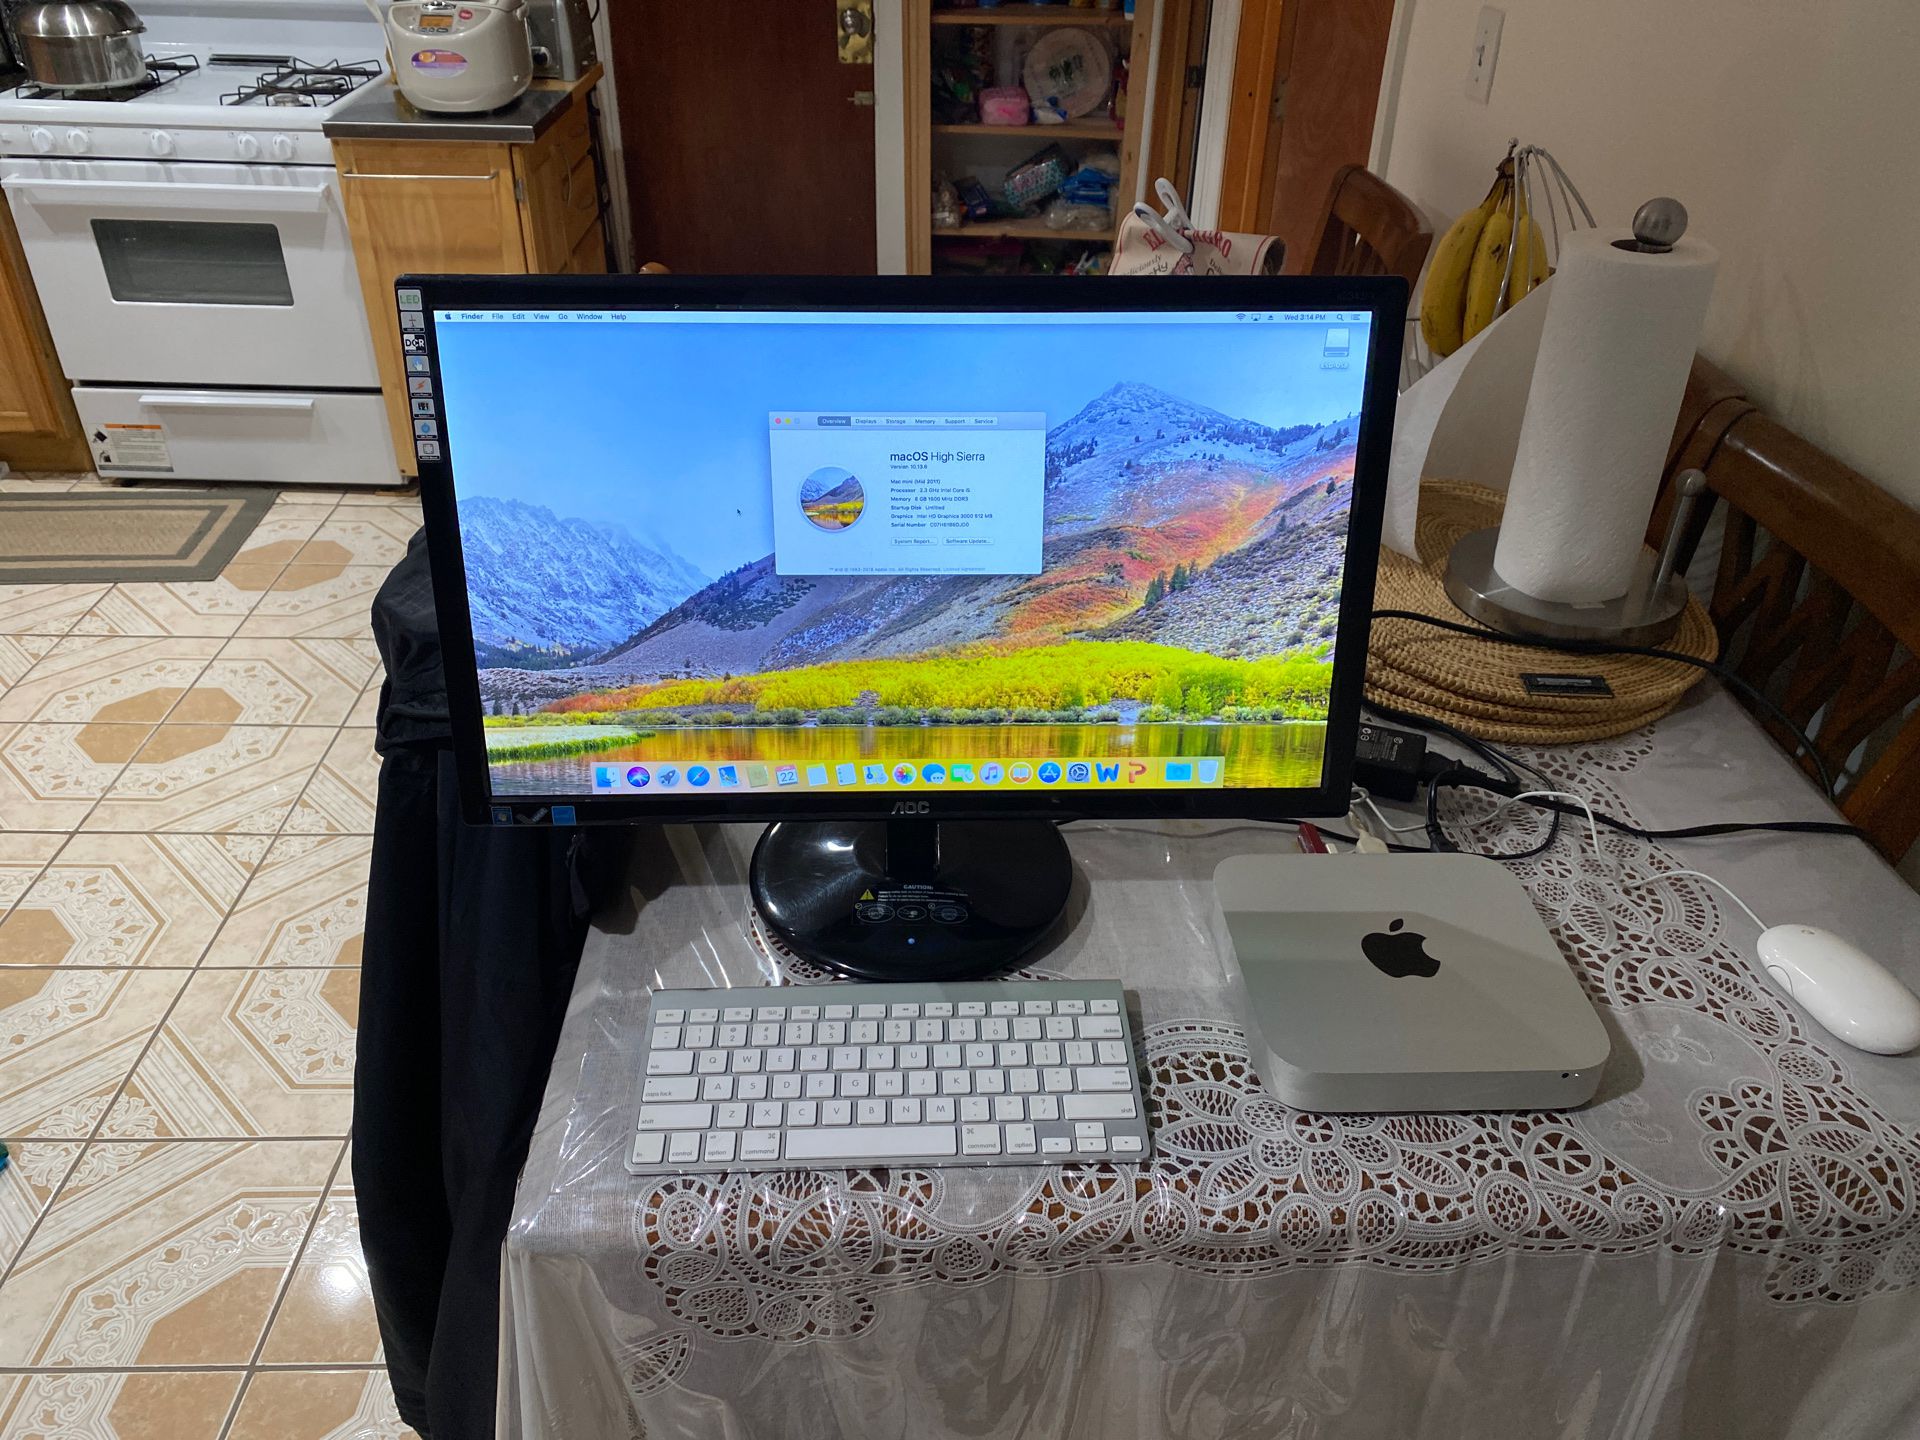 Mac mini with 23inch monitor and keyboard and mouse